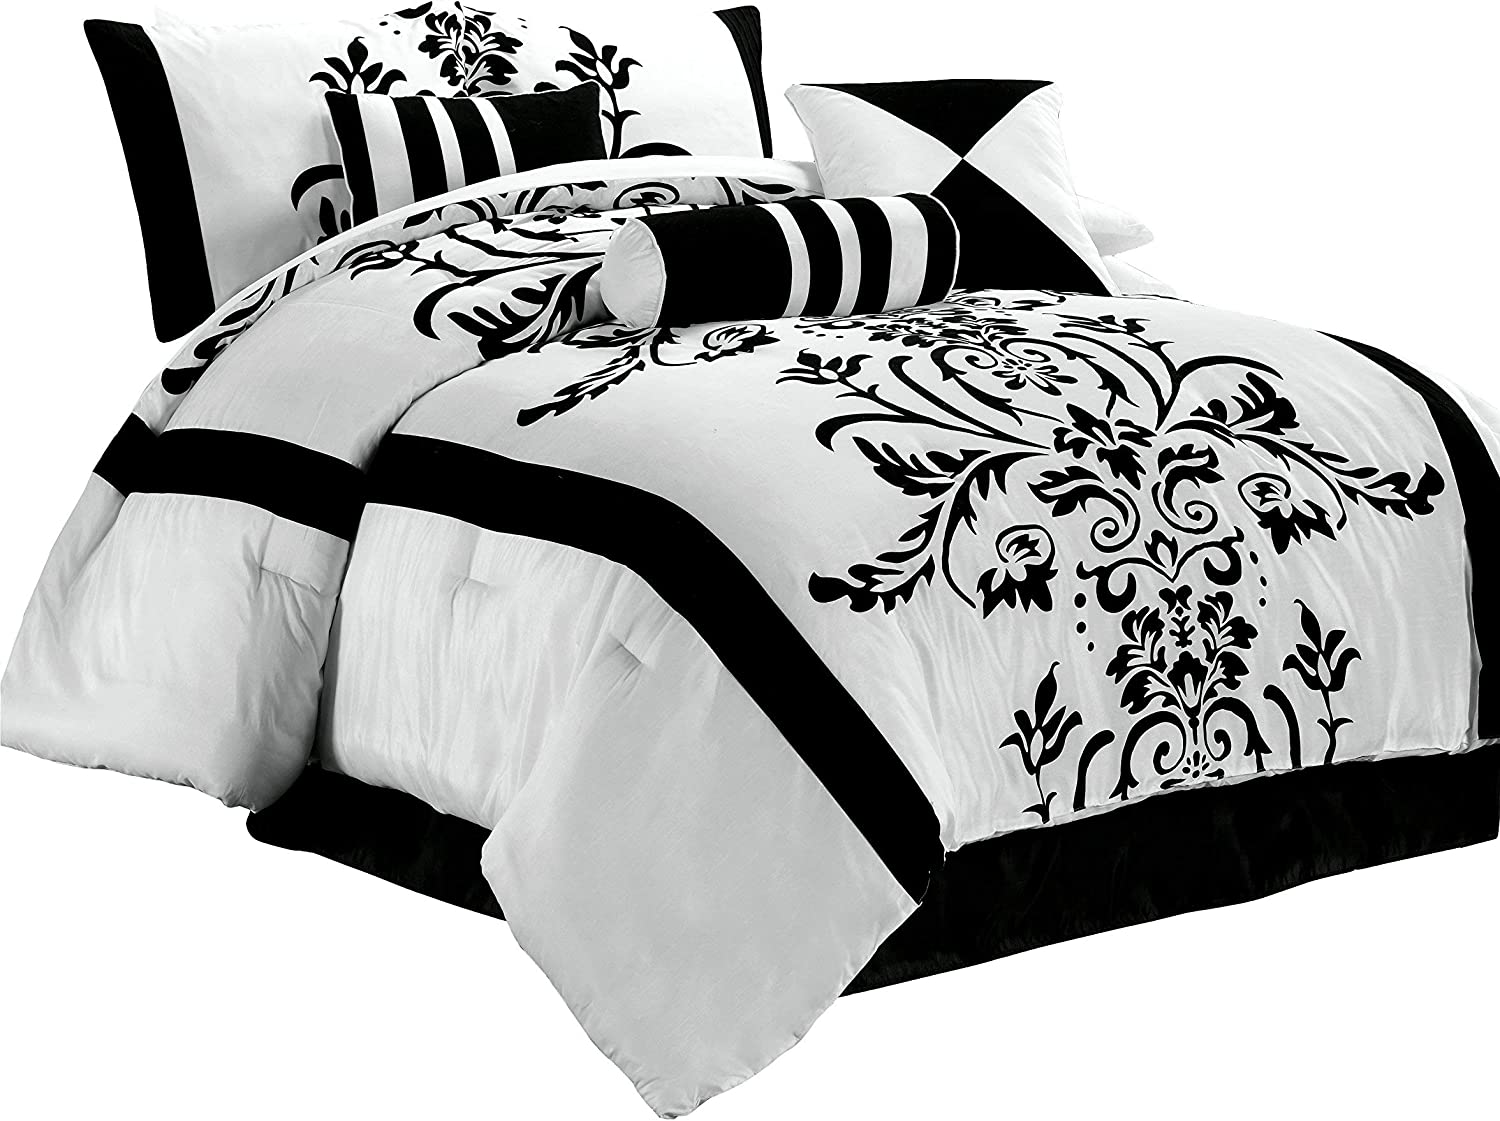 Chezmoi Collection Contemporary 7-Piece Luxury Flocked Floral Fabric Comforter Set, California King, White - image 4 of 5